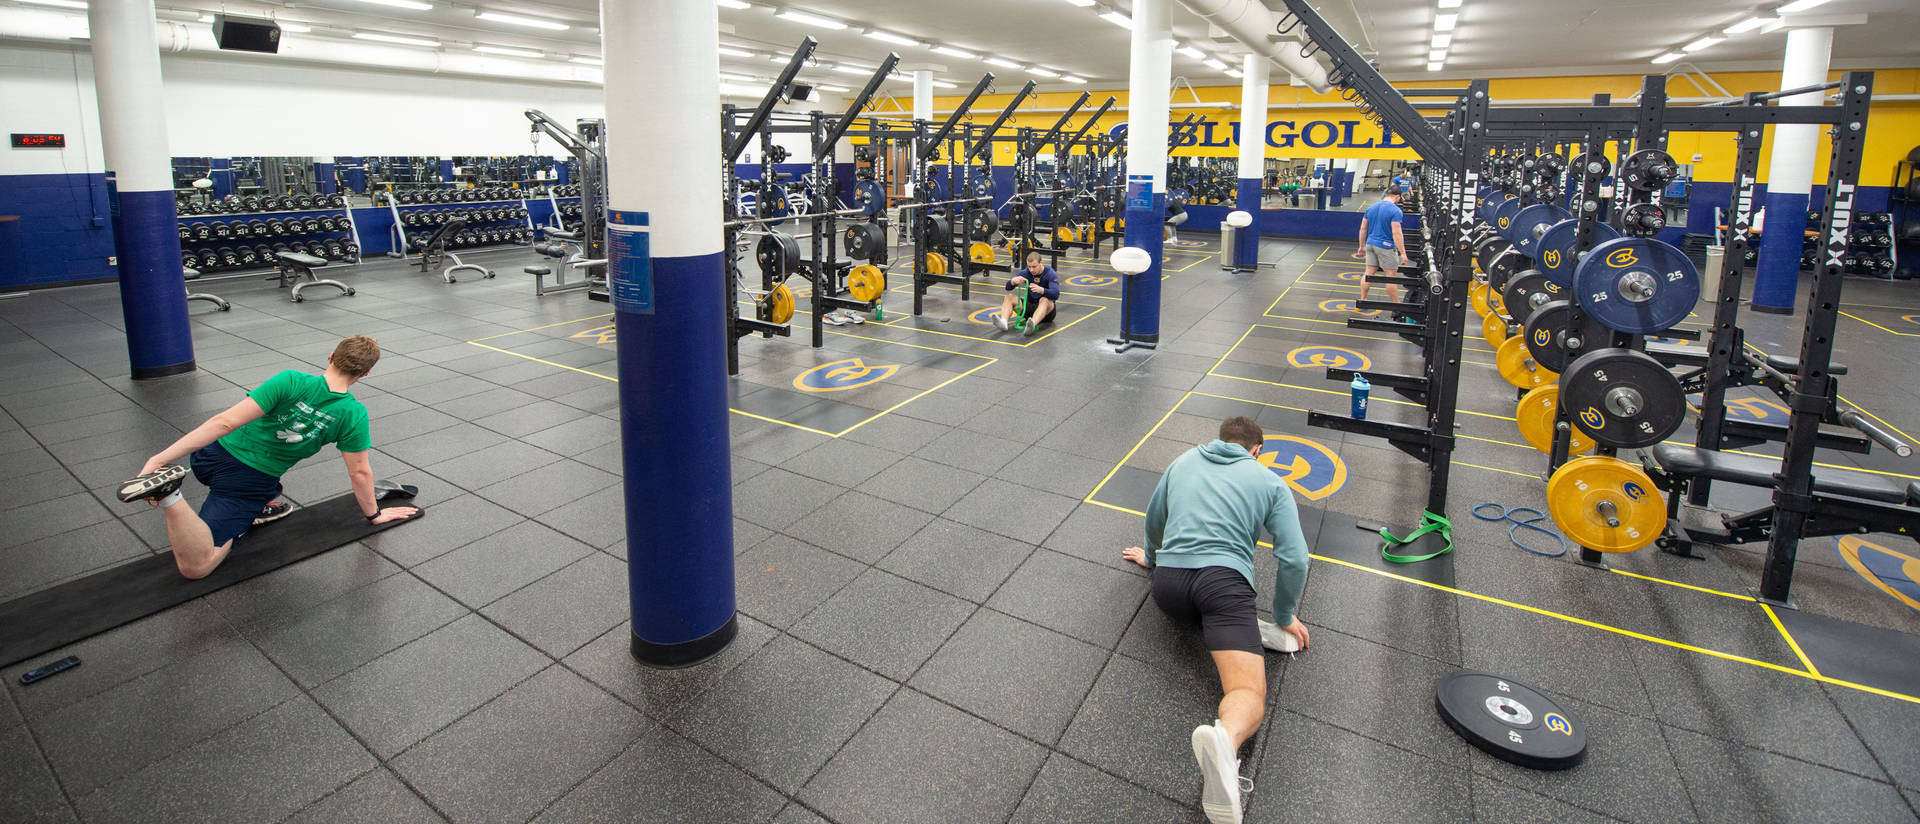 Workout and weight room area in McPhee